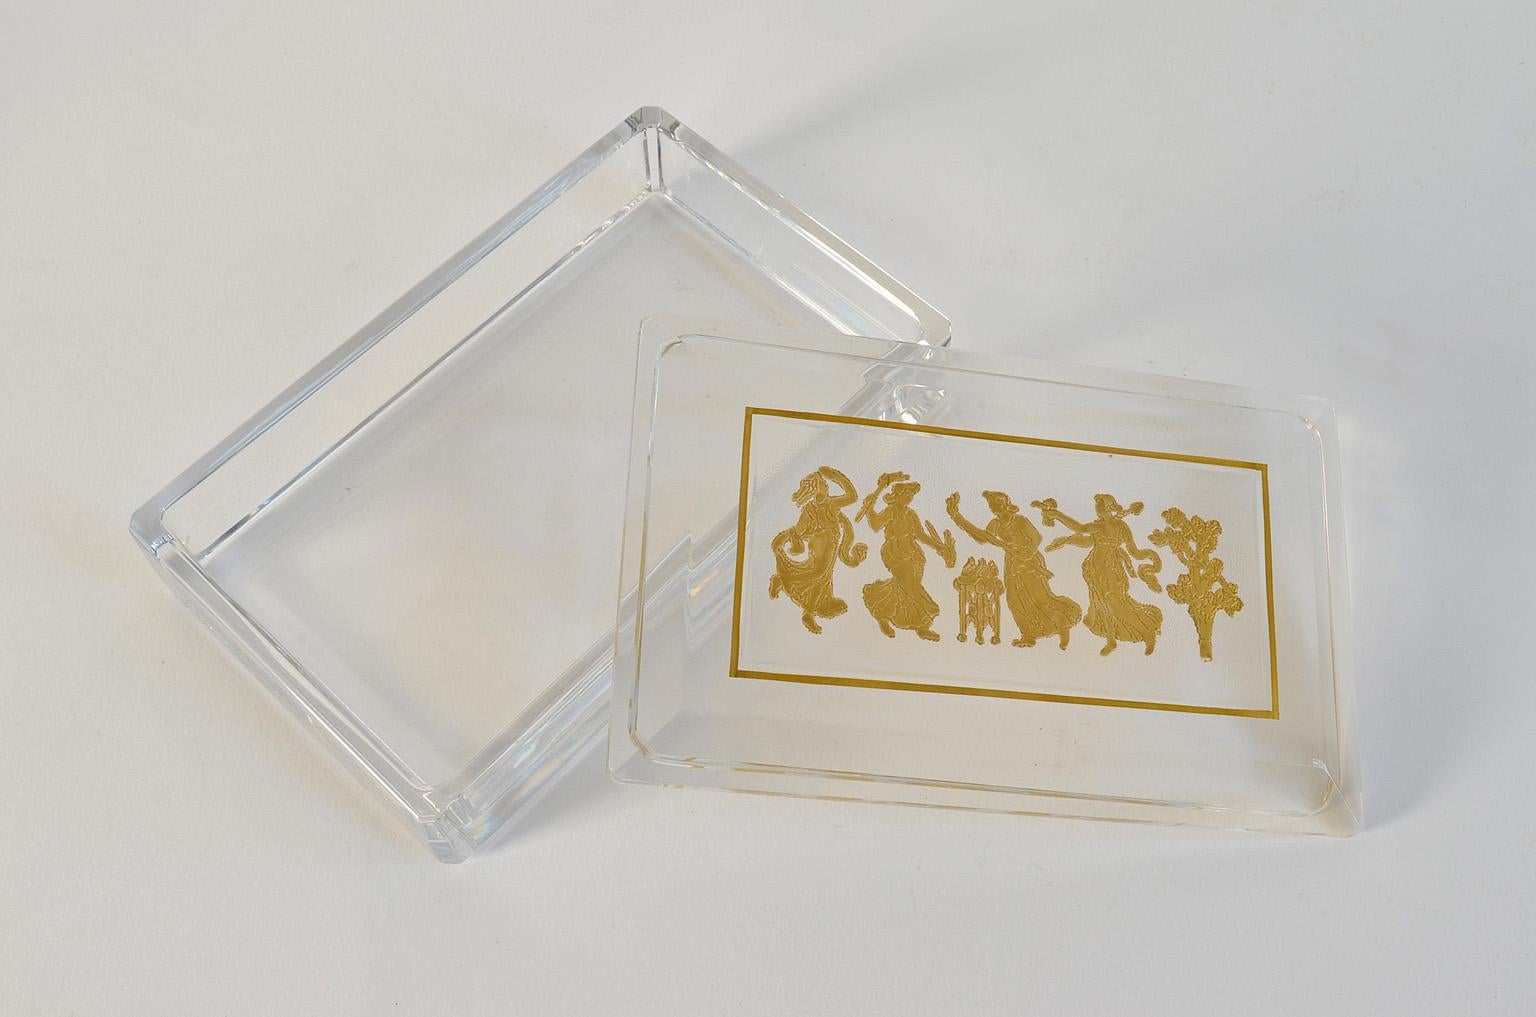 Vintage, midcentury crystal glass box by Leon Ledru for Val Saint Lambert,
with a mythological dance scene, etched in gold known as 